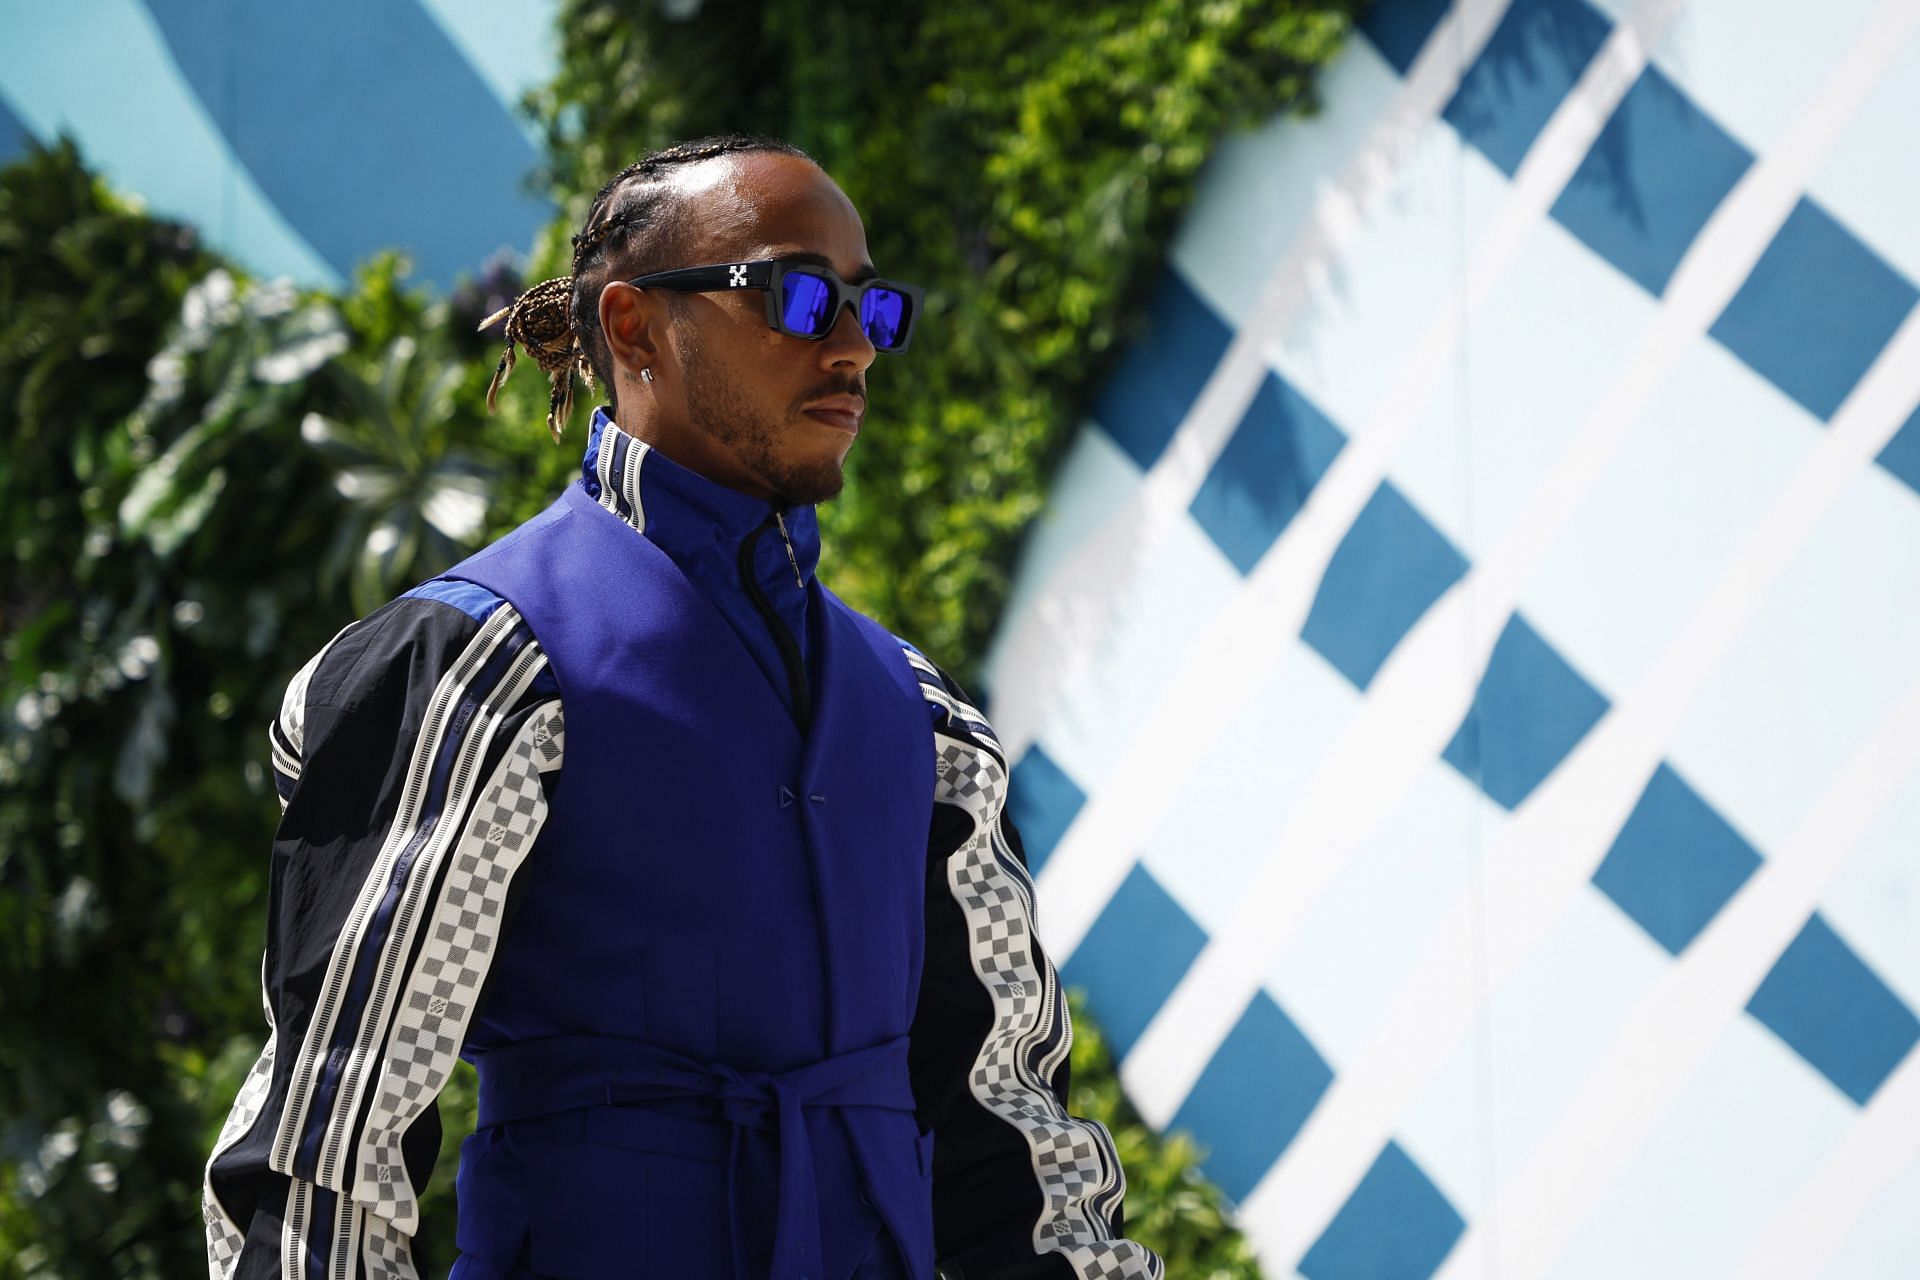 Lewis Hamilton of Great Britain and Mercedes walks in the Paddock during previews ahead of the F1 Grand Prix of Miami at the Miami International Autodrome on May 05, 2022 in Miami, Florida. (Photo by Jared C. Tilton/Getty Images